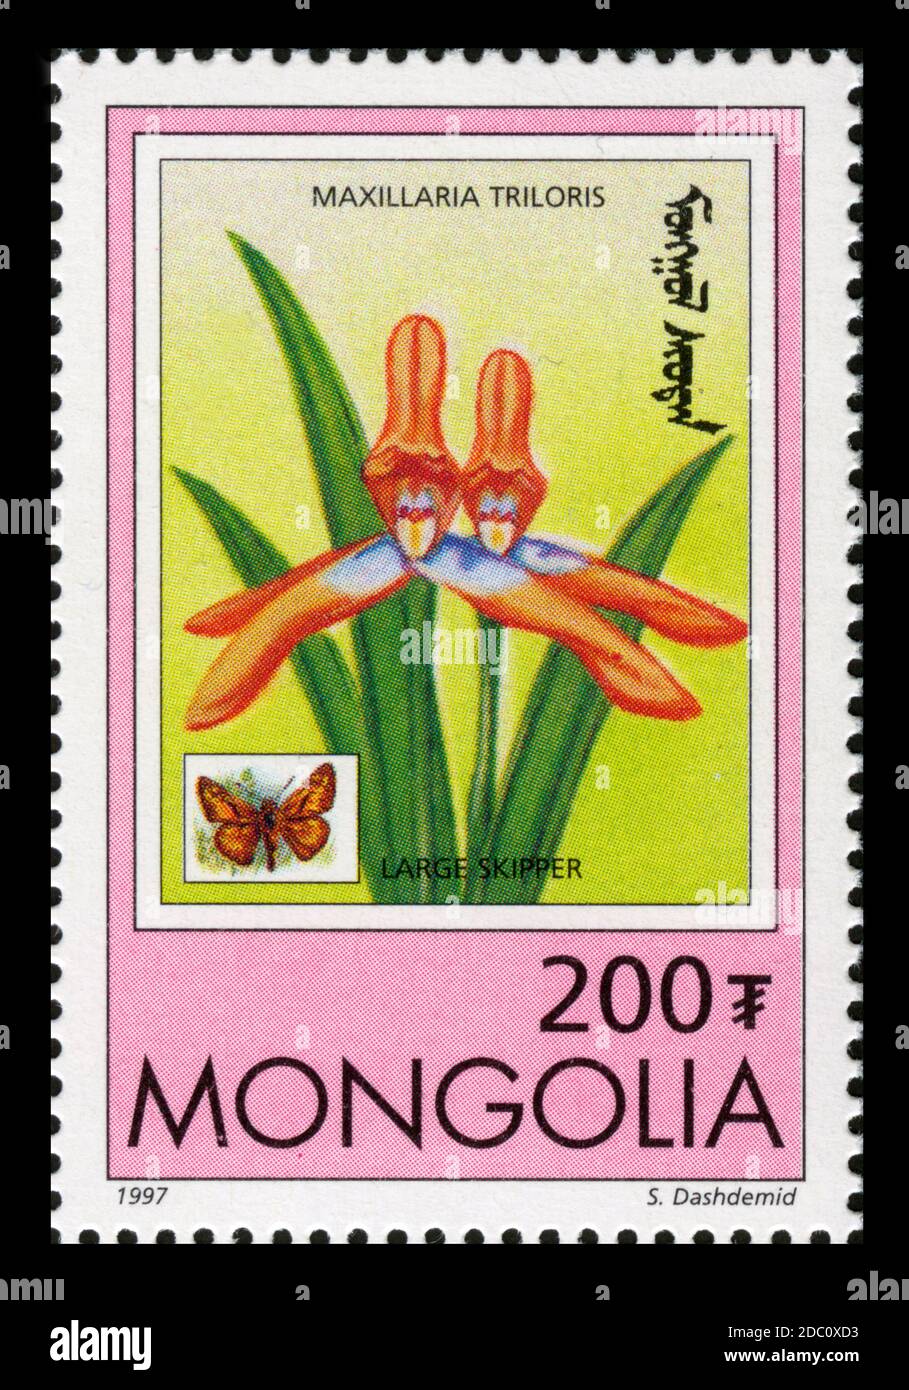 Stamp print in Mongolia,1997,flowers, orchids,Maxillaria Triloris,Large Skipper Stock Photo